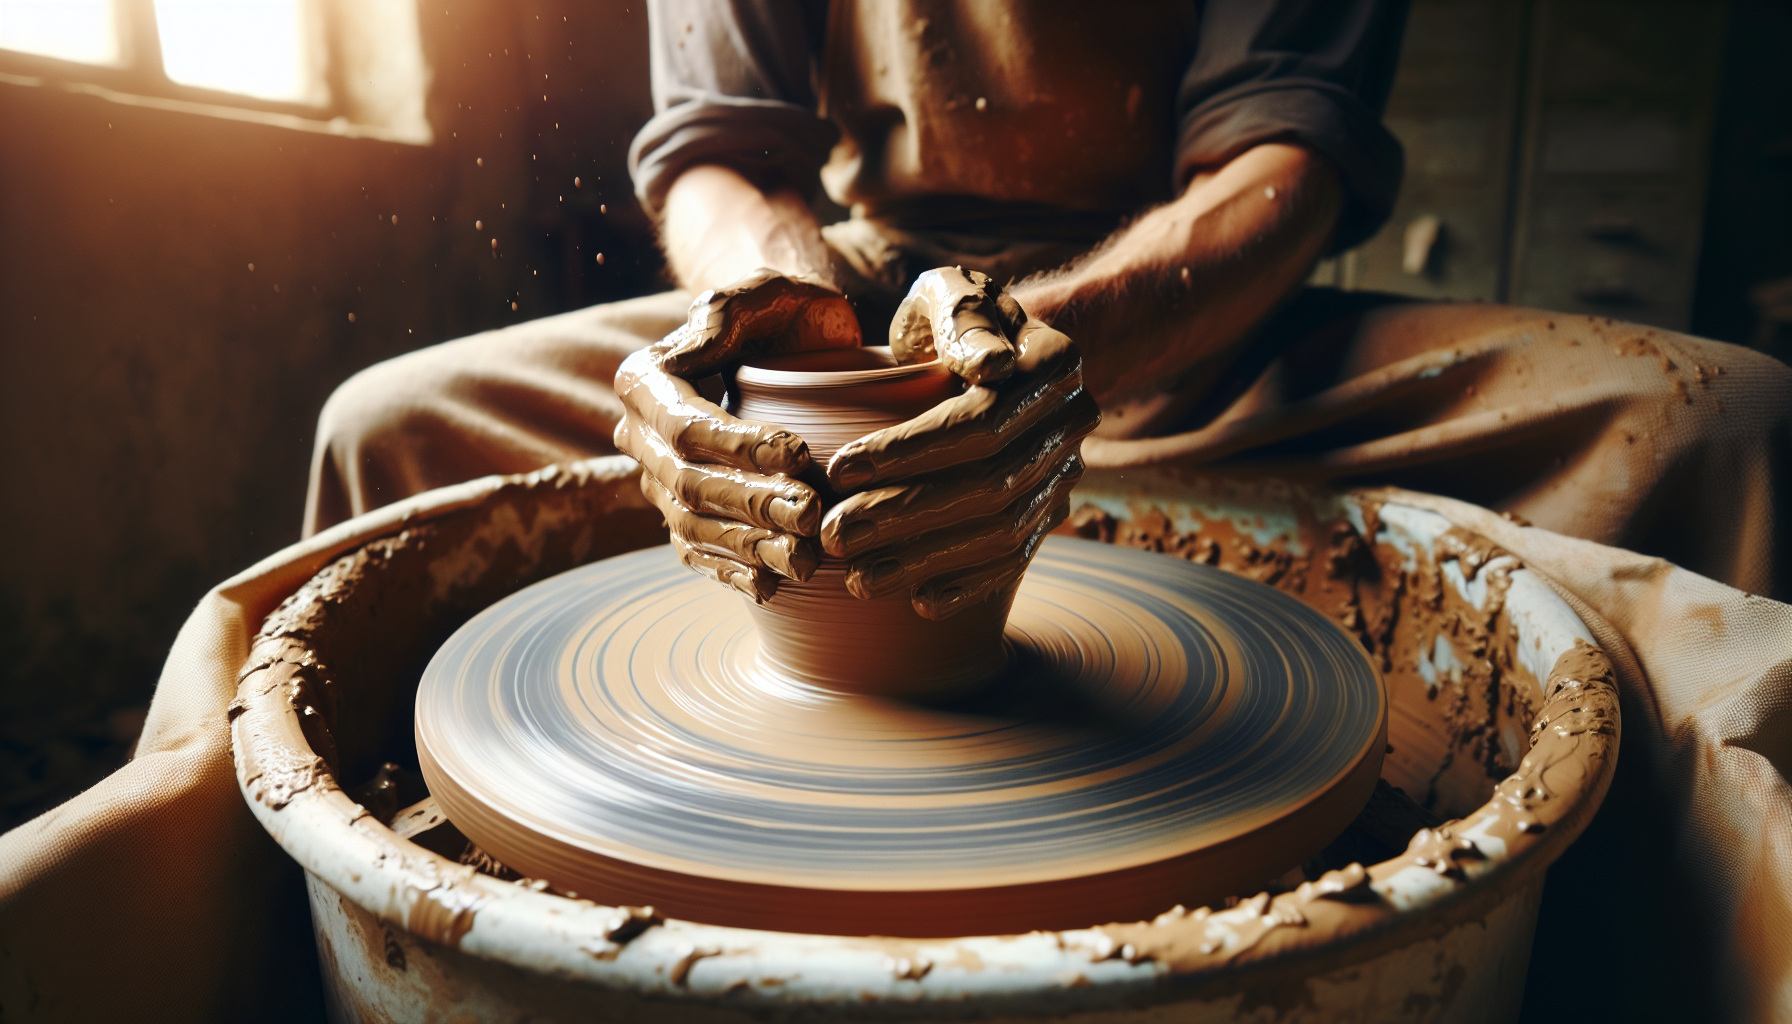 Potter shaping clay on a potter's wheel